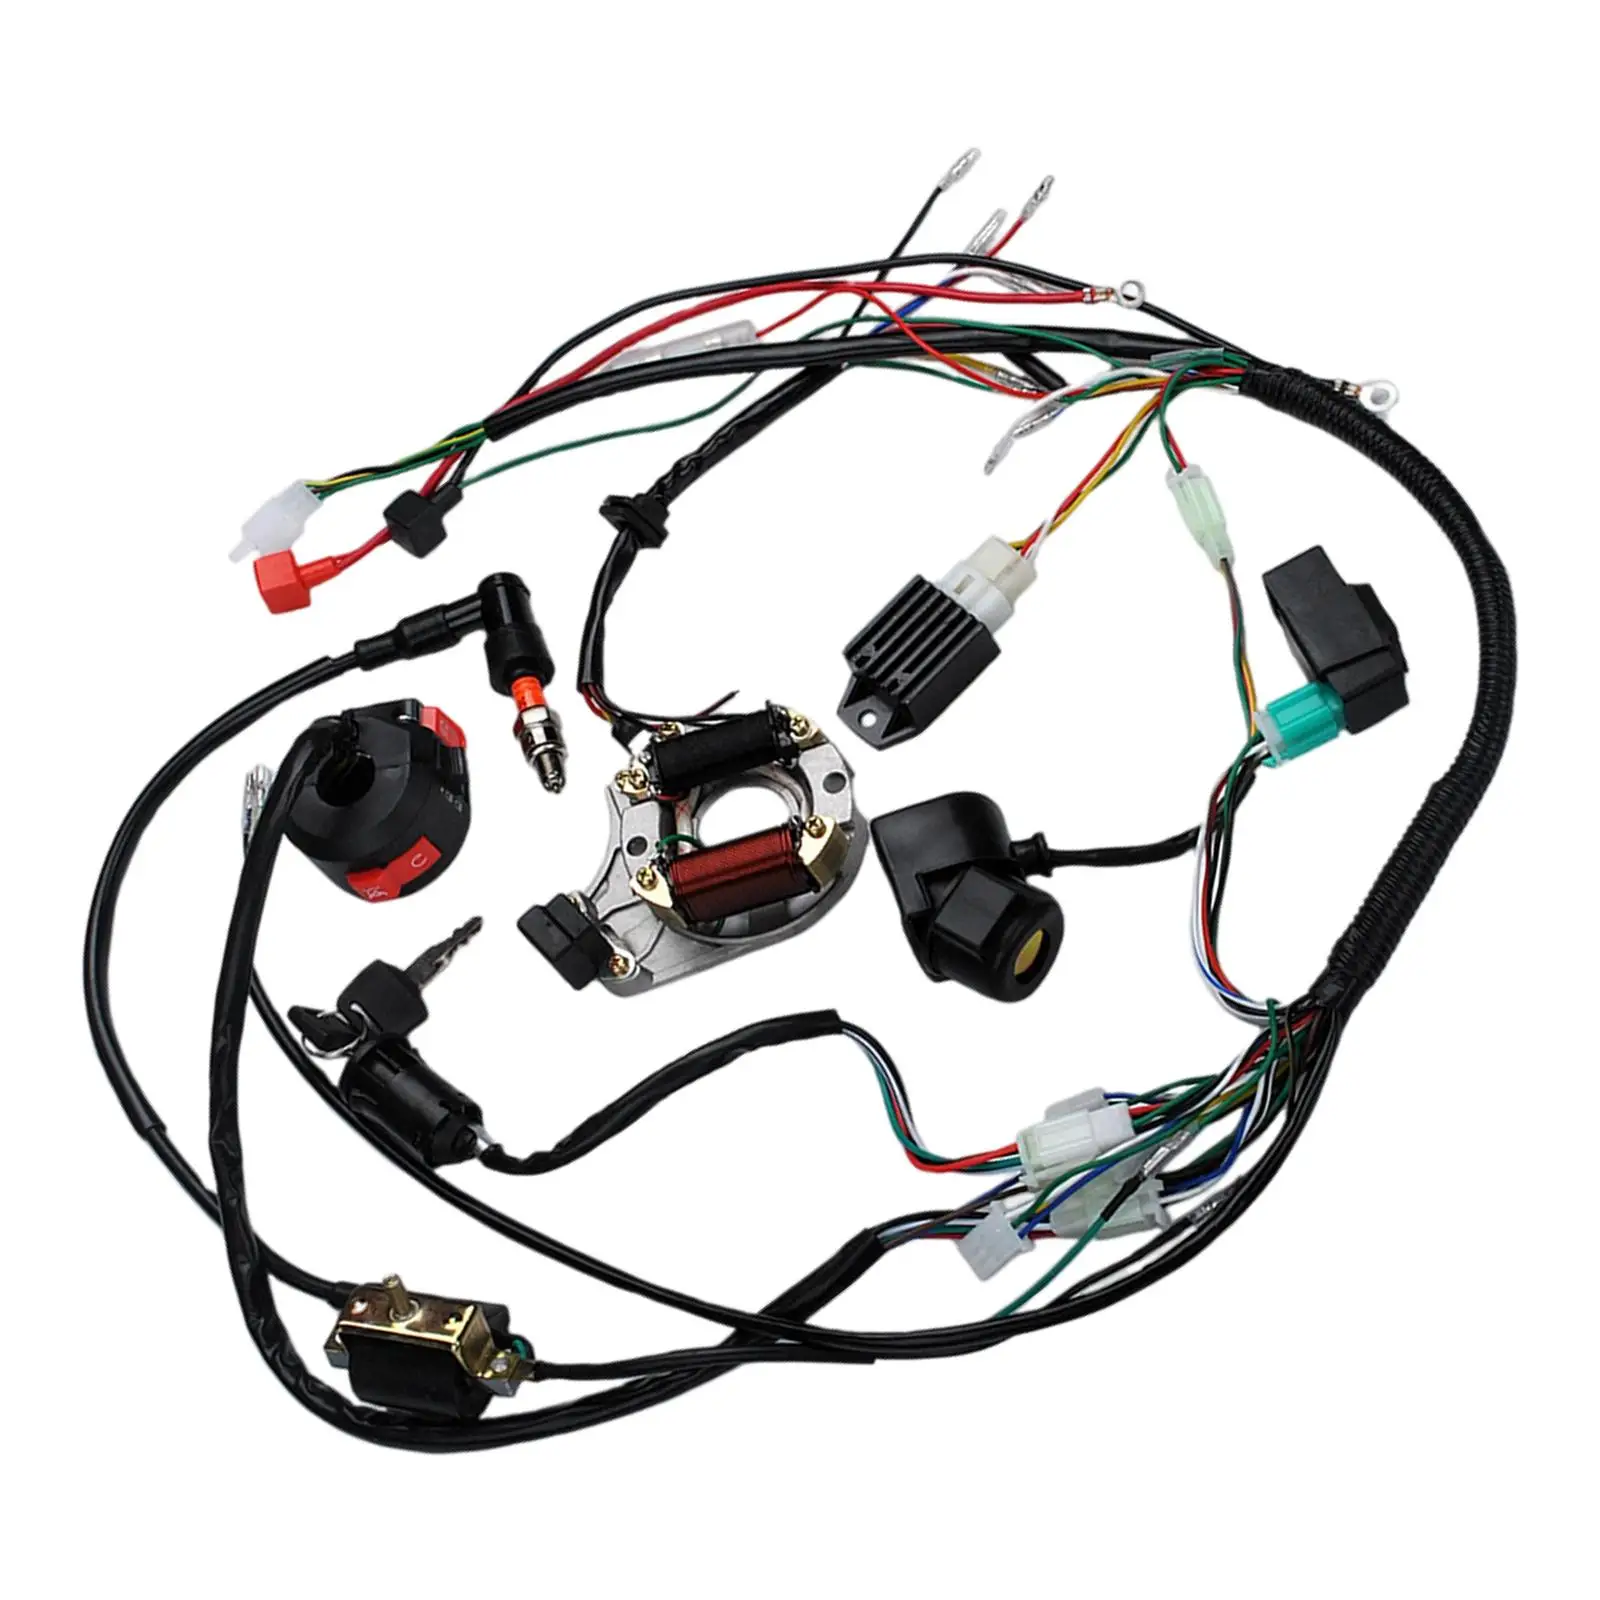 1Set Full Complete Electrics Wiring Harness Coil Solenoid Relay Cdi for Dirt Bike 4 Wheelers Stroke Buggy Quad Scooter